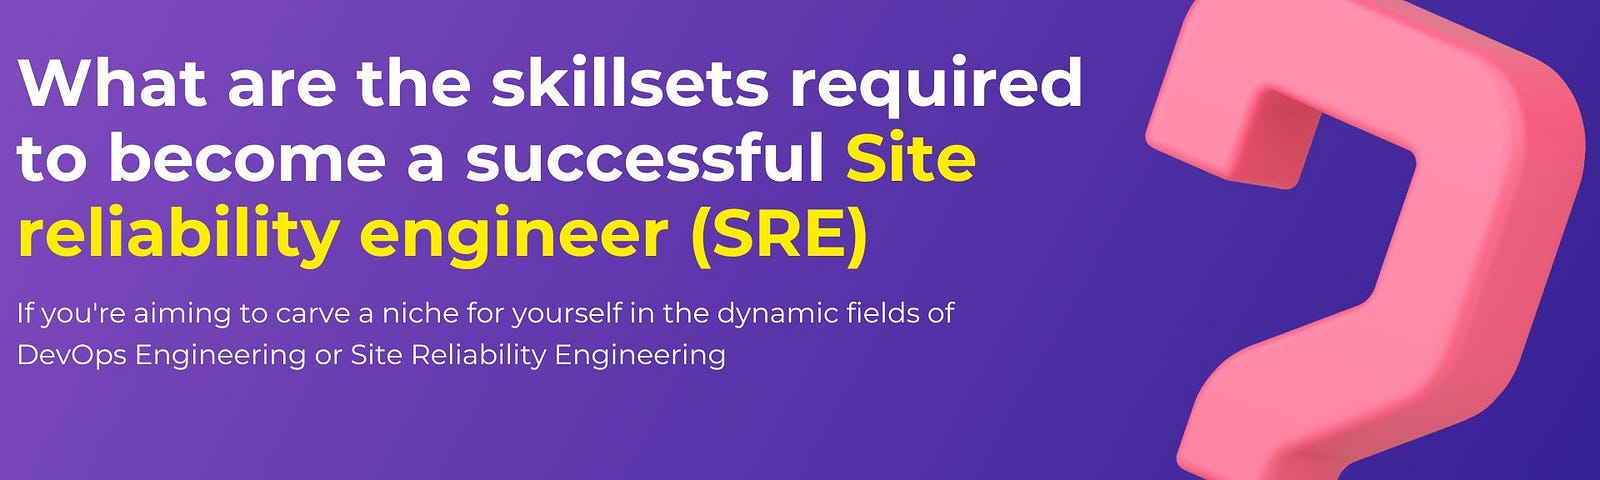 site reliability engineering certification